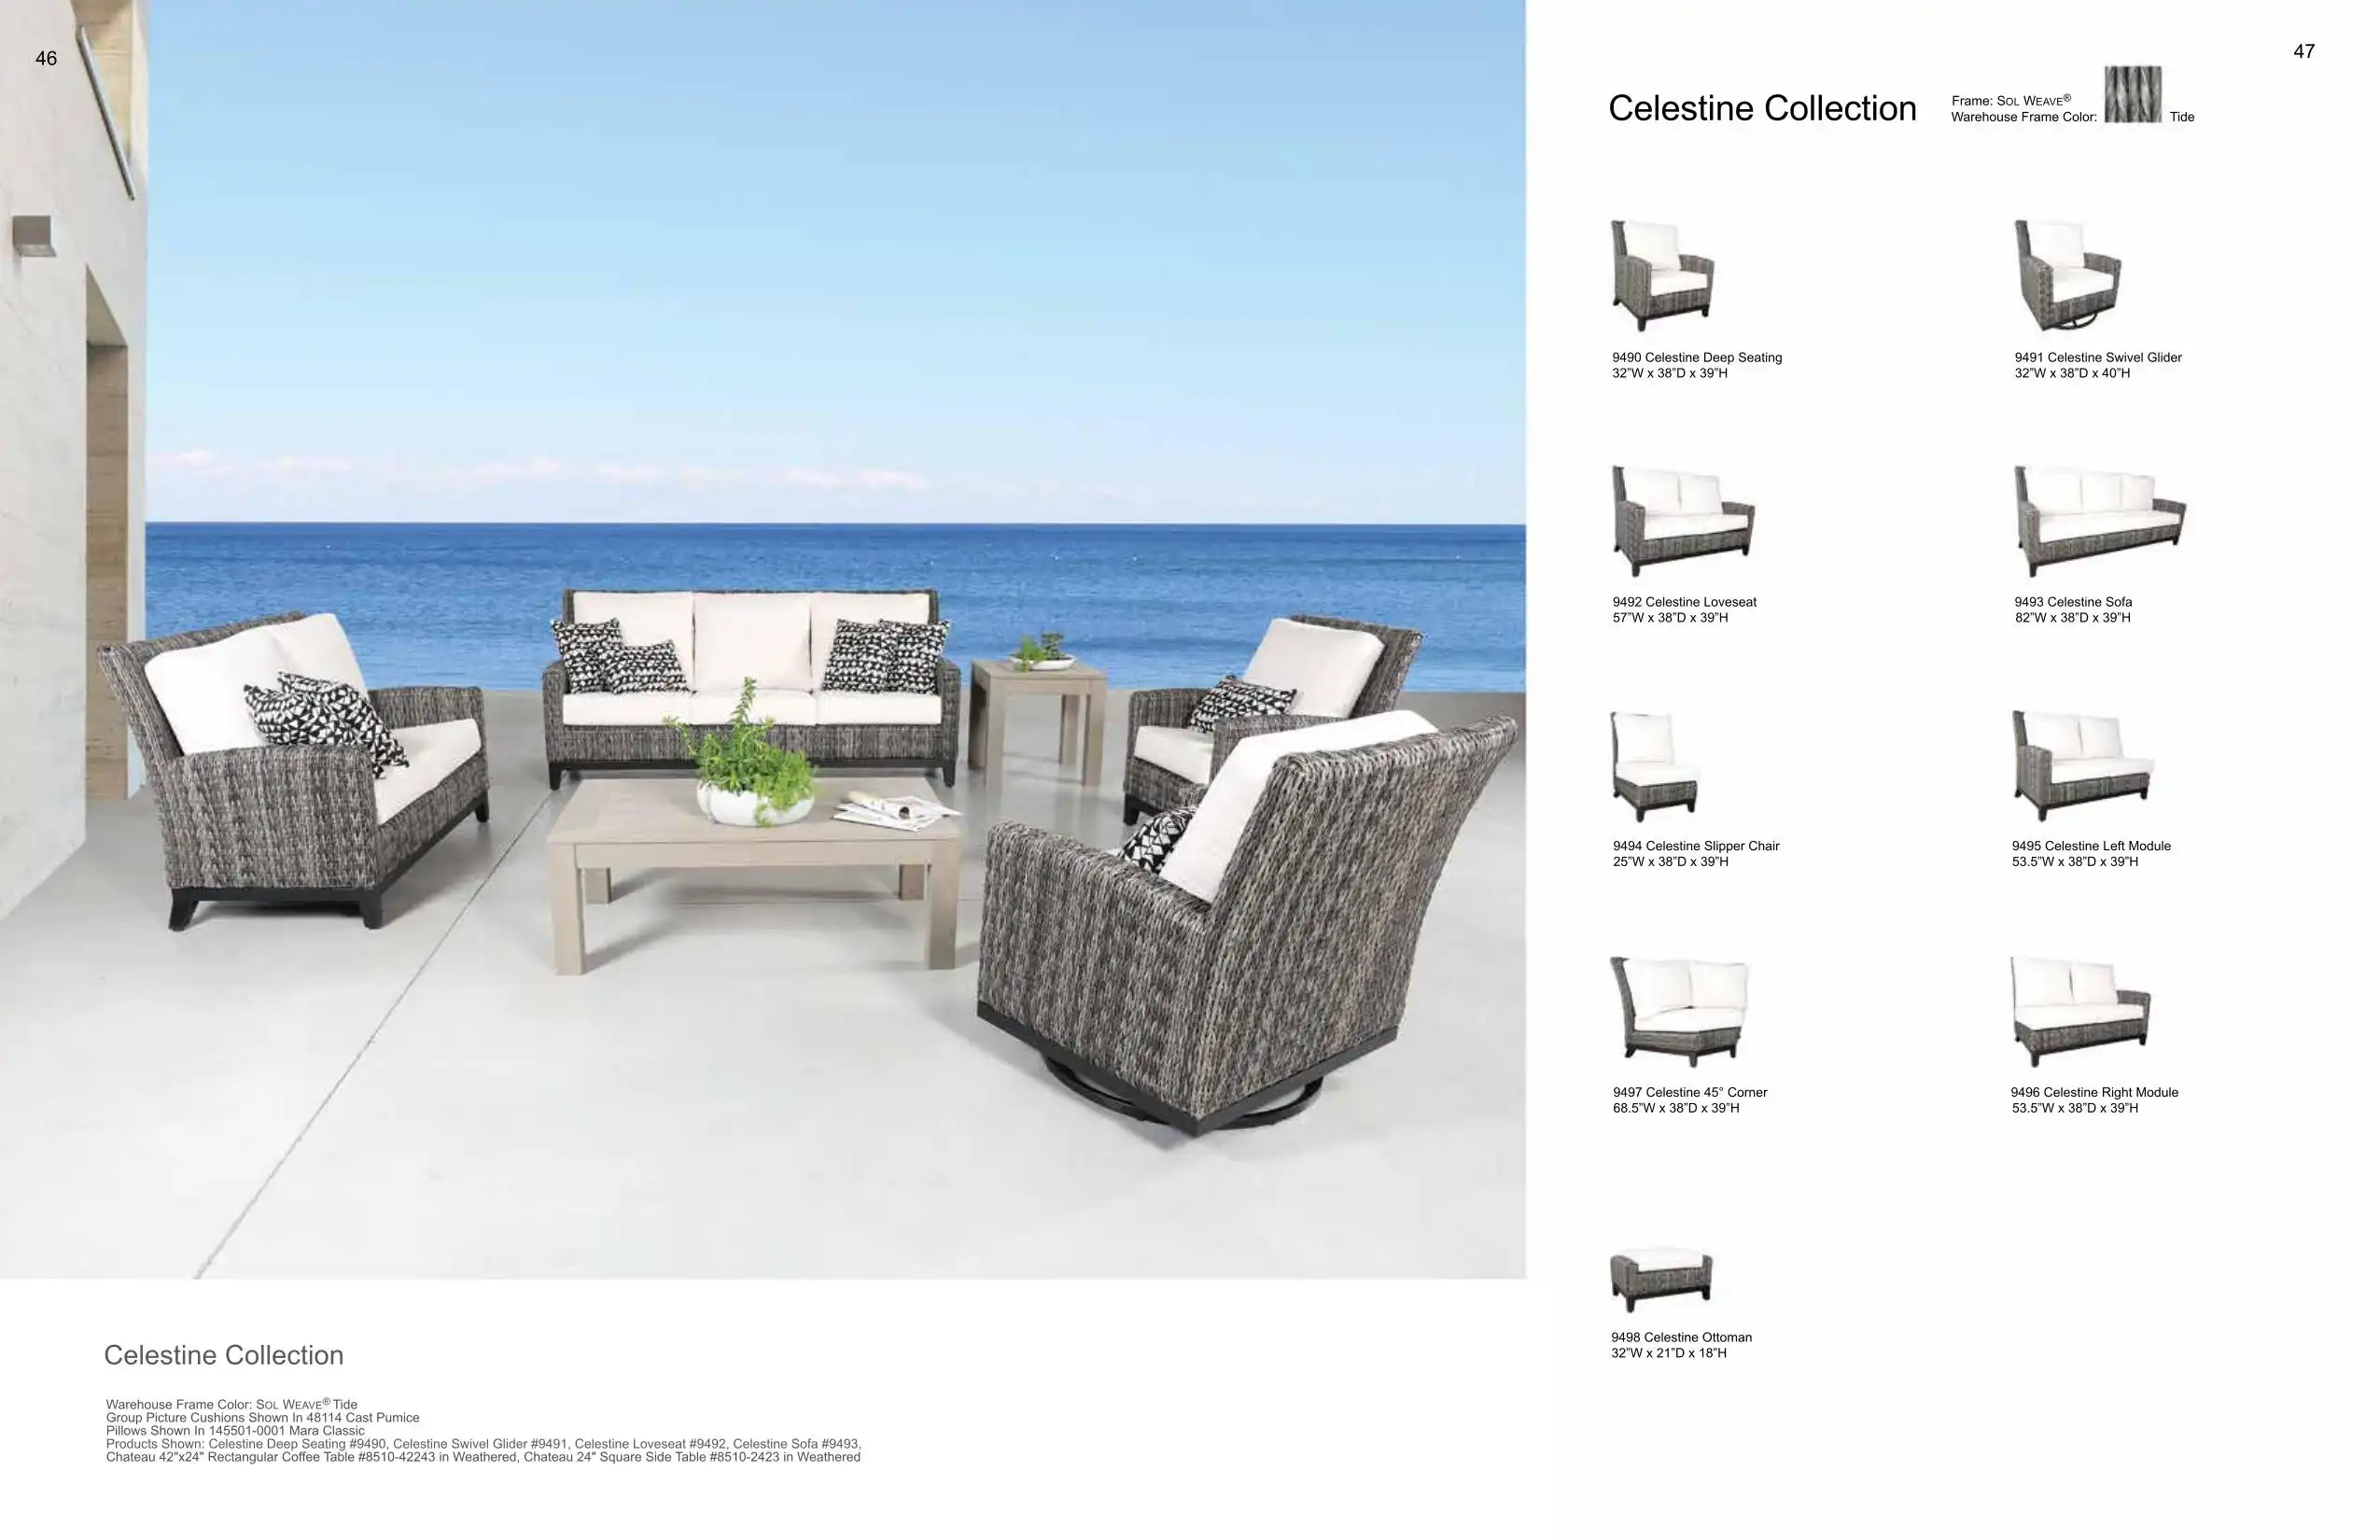 CELESTINE Sofa & Sectional (WICKER) Collection(s) by Cabana Coast